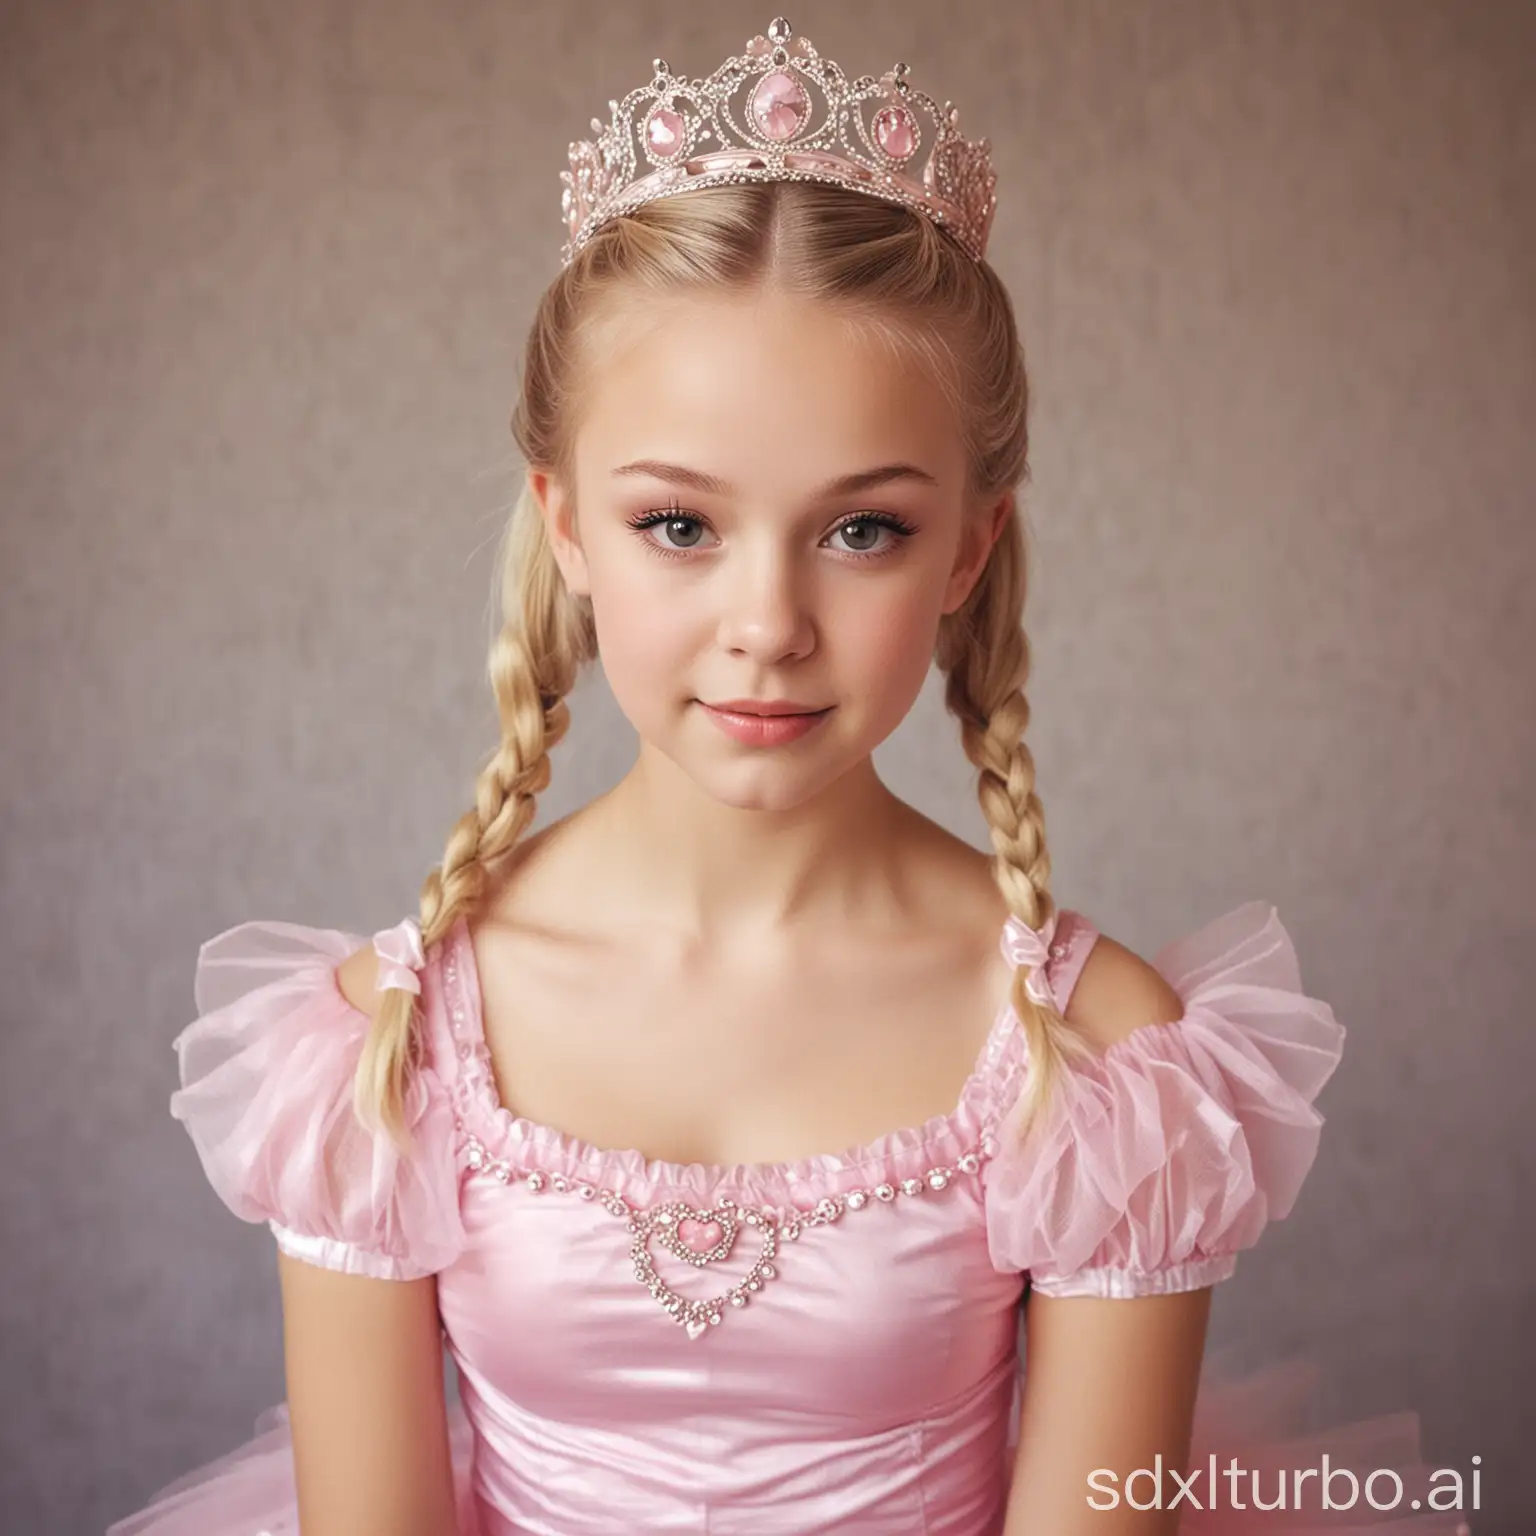 Teen-Ballerina-with-Pink-Tutu-and-Blonde-Pigtails